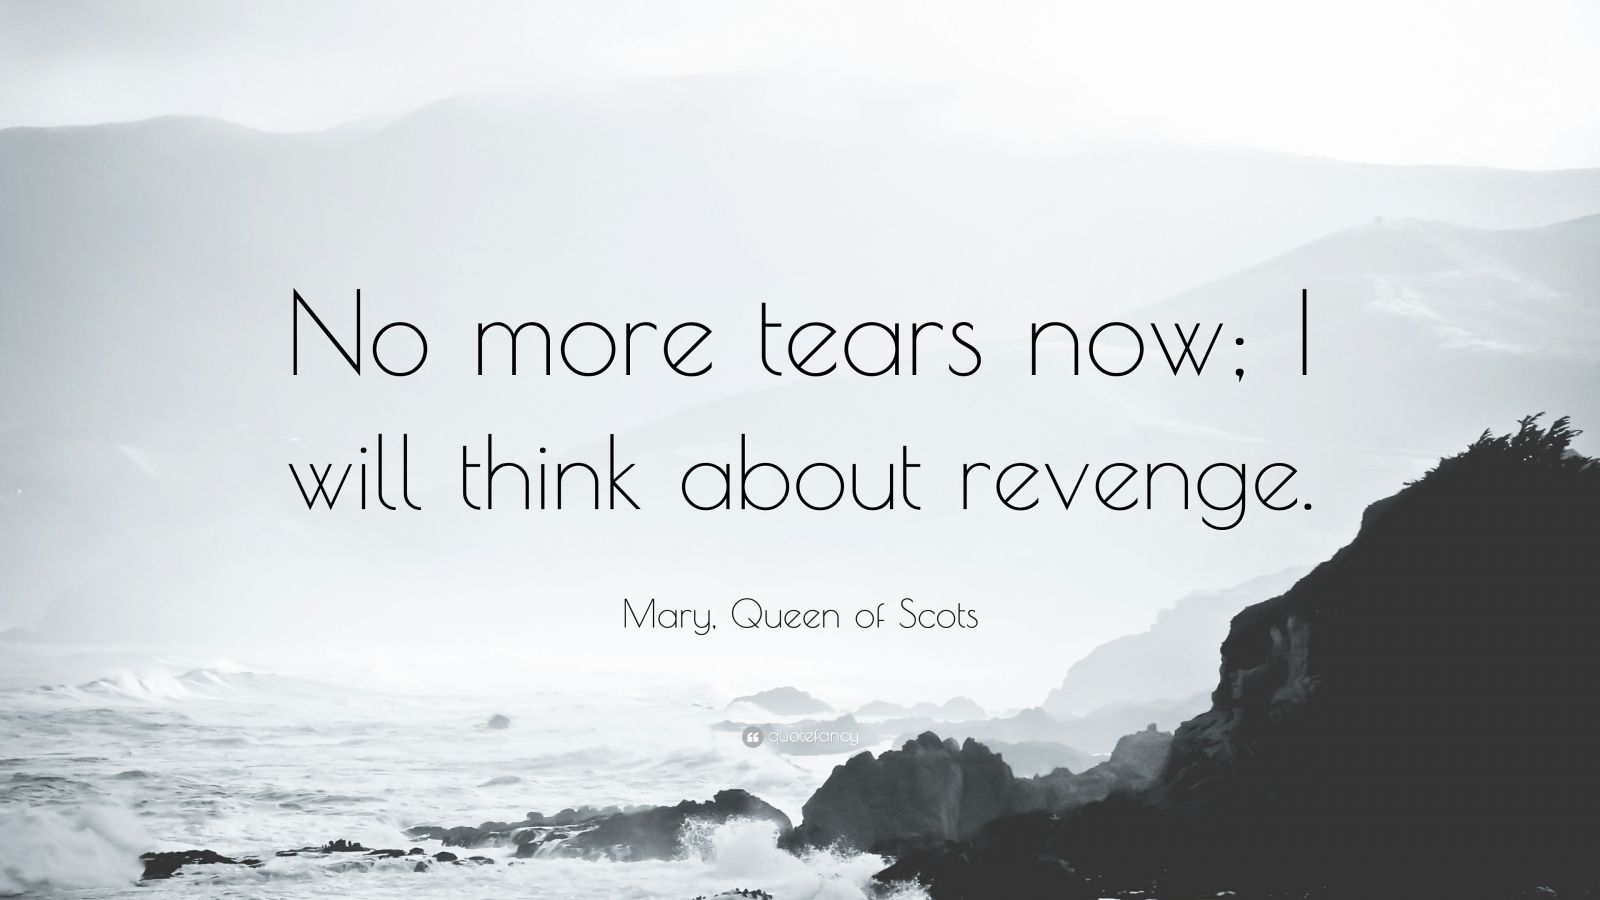 Mary, Queen of I will Quote: about more “No think Scots now; tears